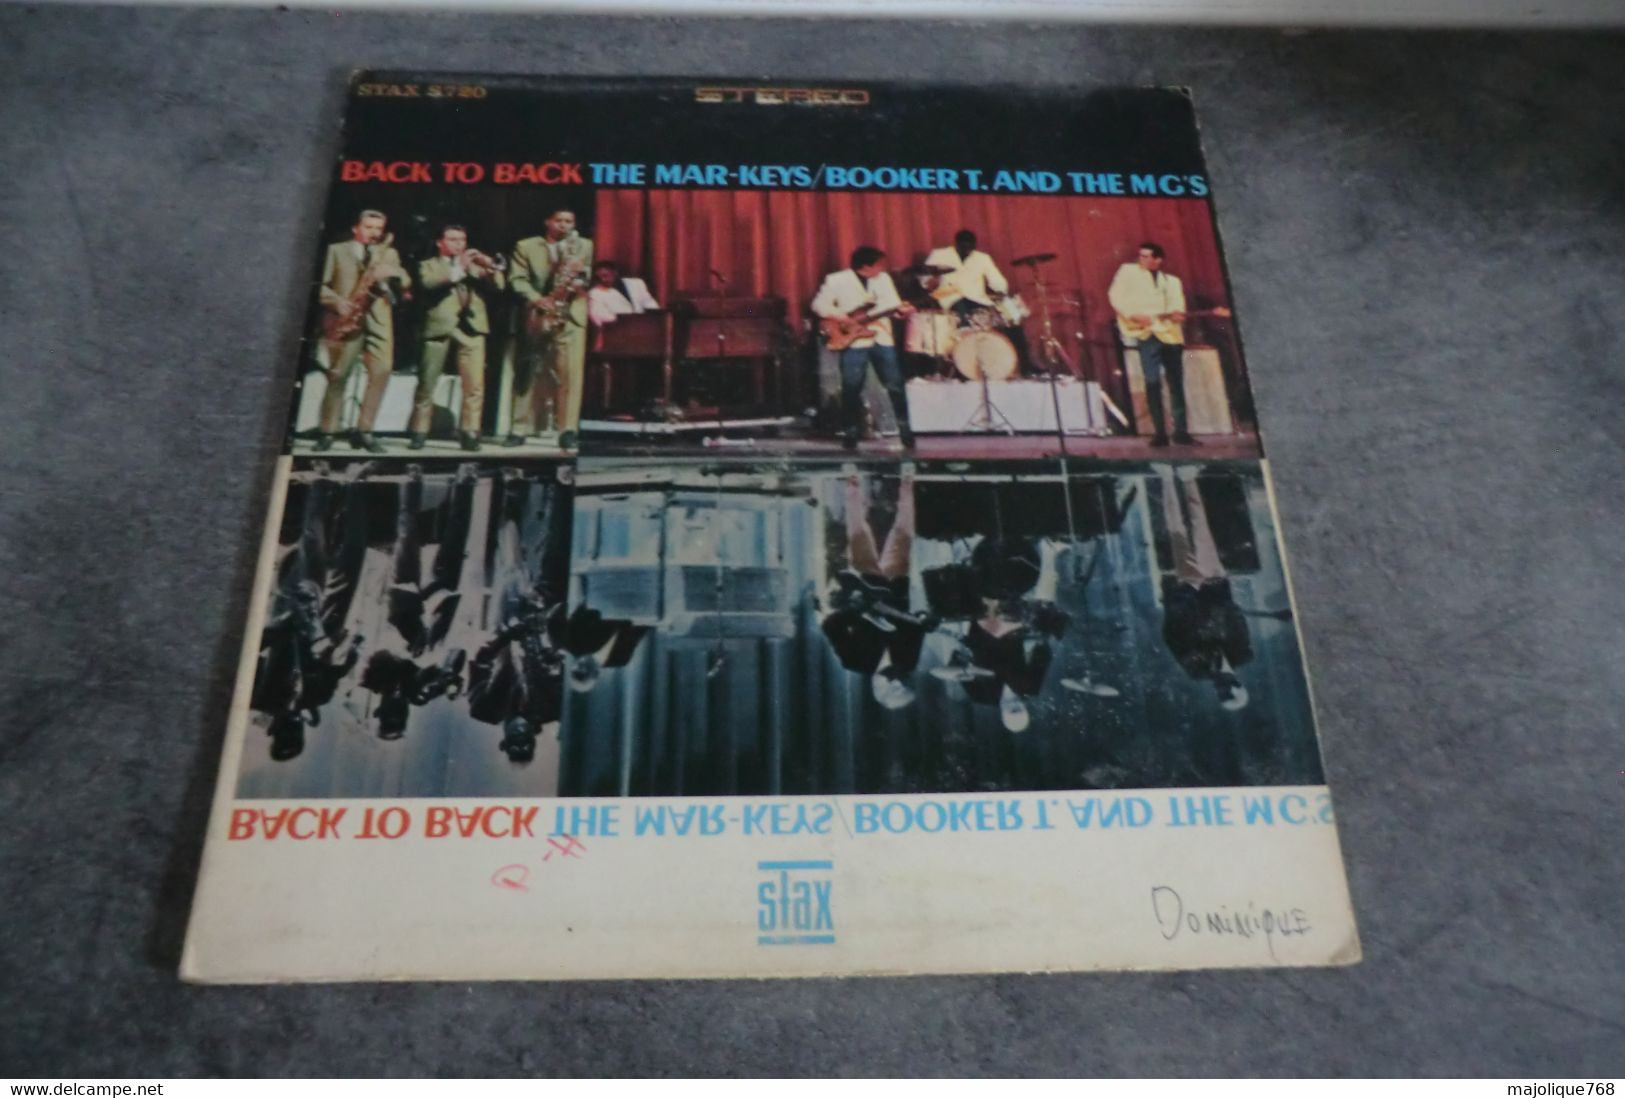 Disque De The Mar-Keys/Booker T. And The M G' S - Back To Back - STAX S 720 - US 1967 - Soul - R&B